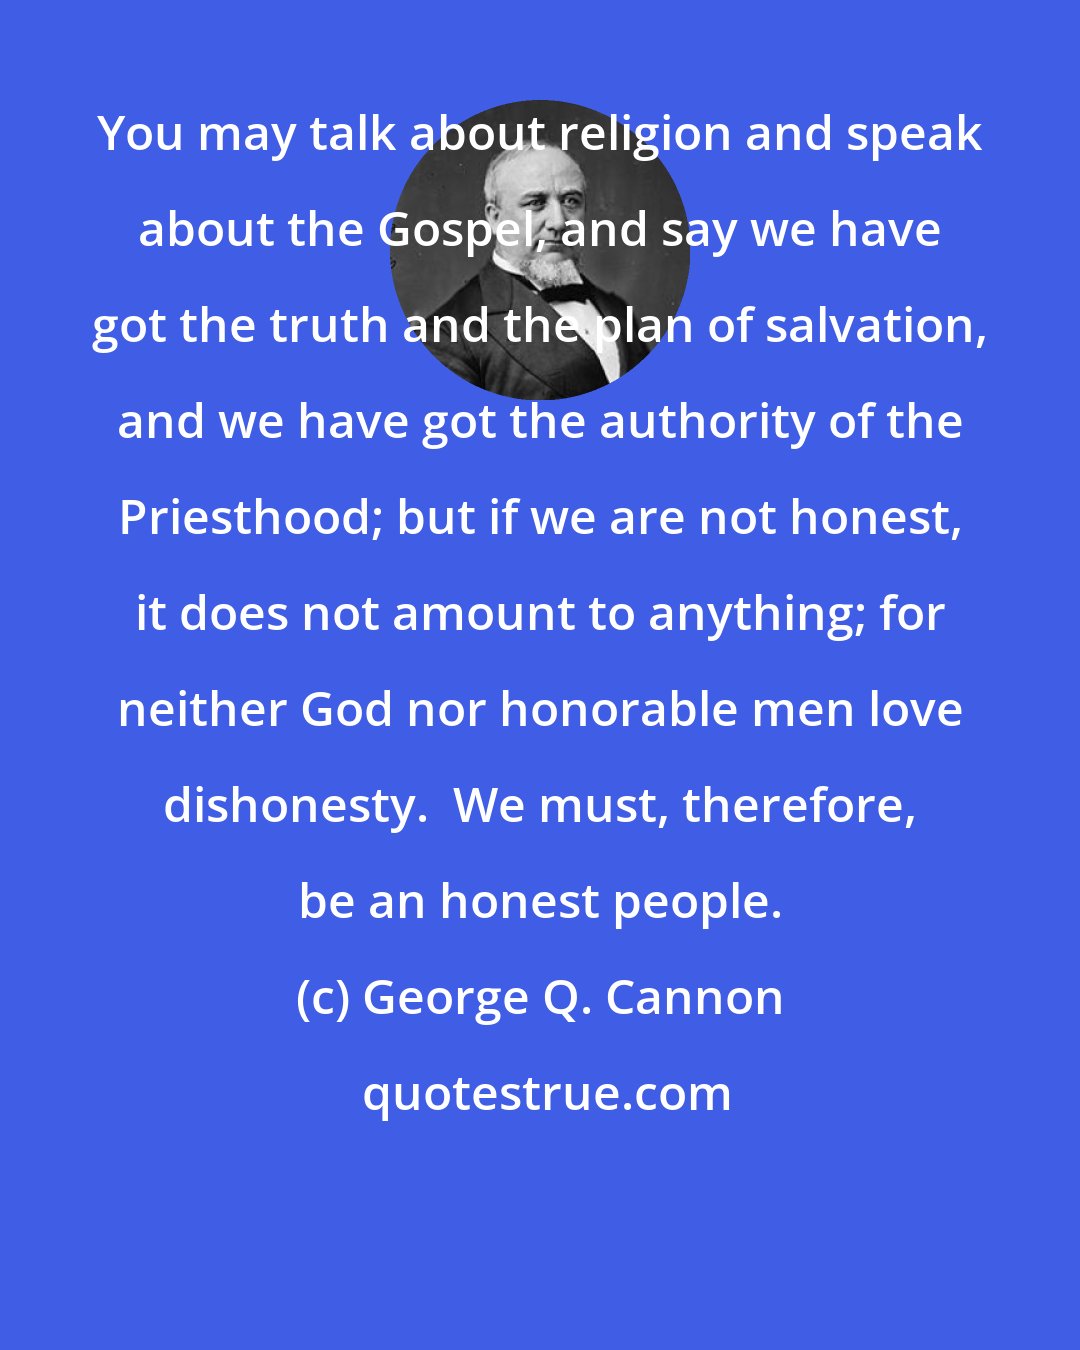 George Q. Cannon: You may talk about religion and speak about the Gospel, and say we have got the truth and the plan of salvation, and we have got the authority of the Priesthood; but if we are not honest, it does not amount to anything; for neither God nor honorable men love dishonesty.  We must, therefore, be an honest people.